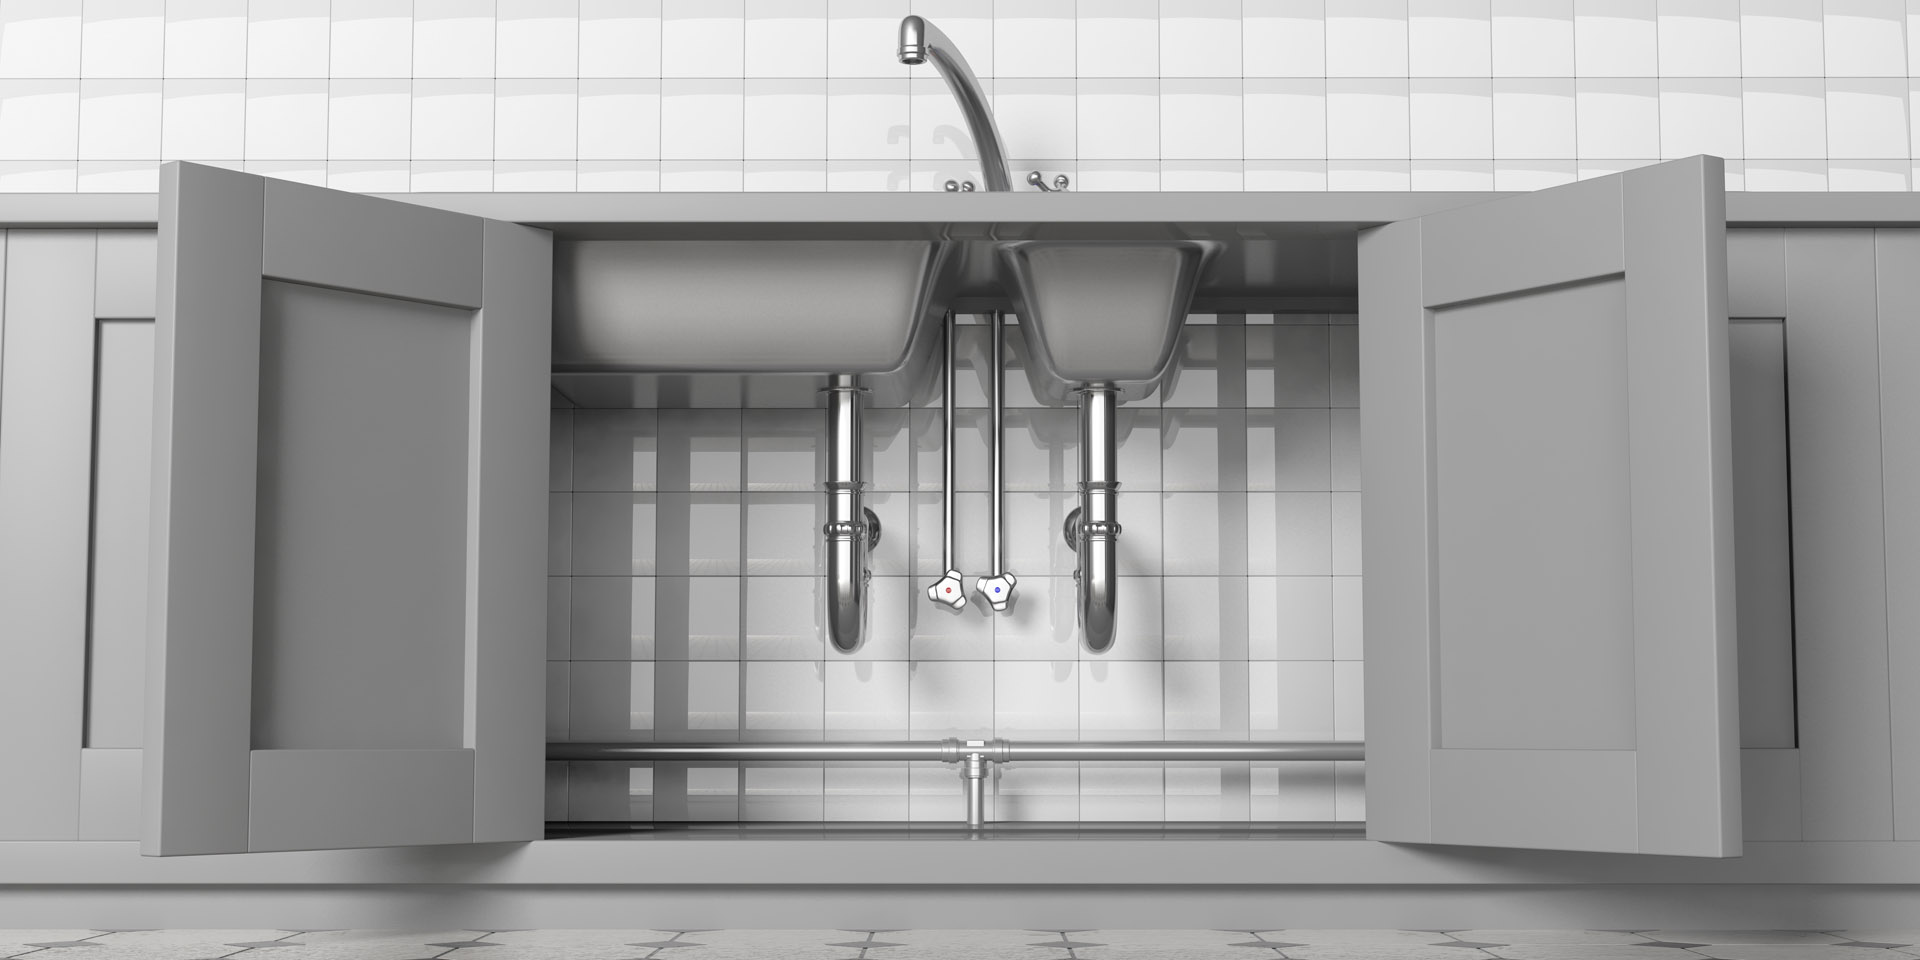 Kitchen cabinets with open doors, stainless steel sink and water tap, under view. White ceramic tiles wall backgound. 3d illustration; Shutterstock ID 1062126185; PO: 25pack; Job: 20180906; Client: tt; Other: aa